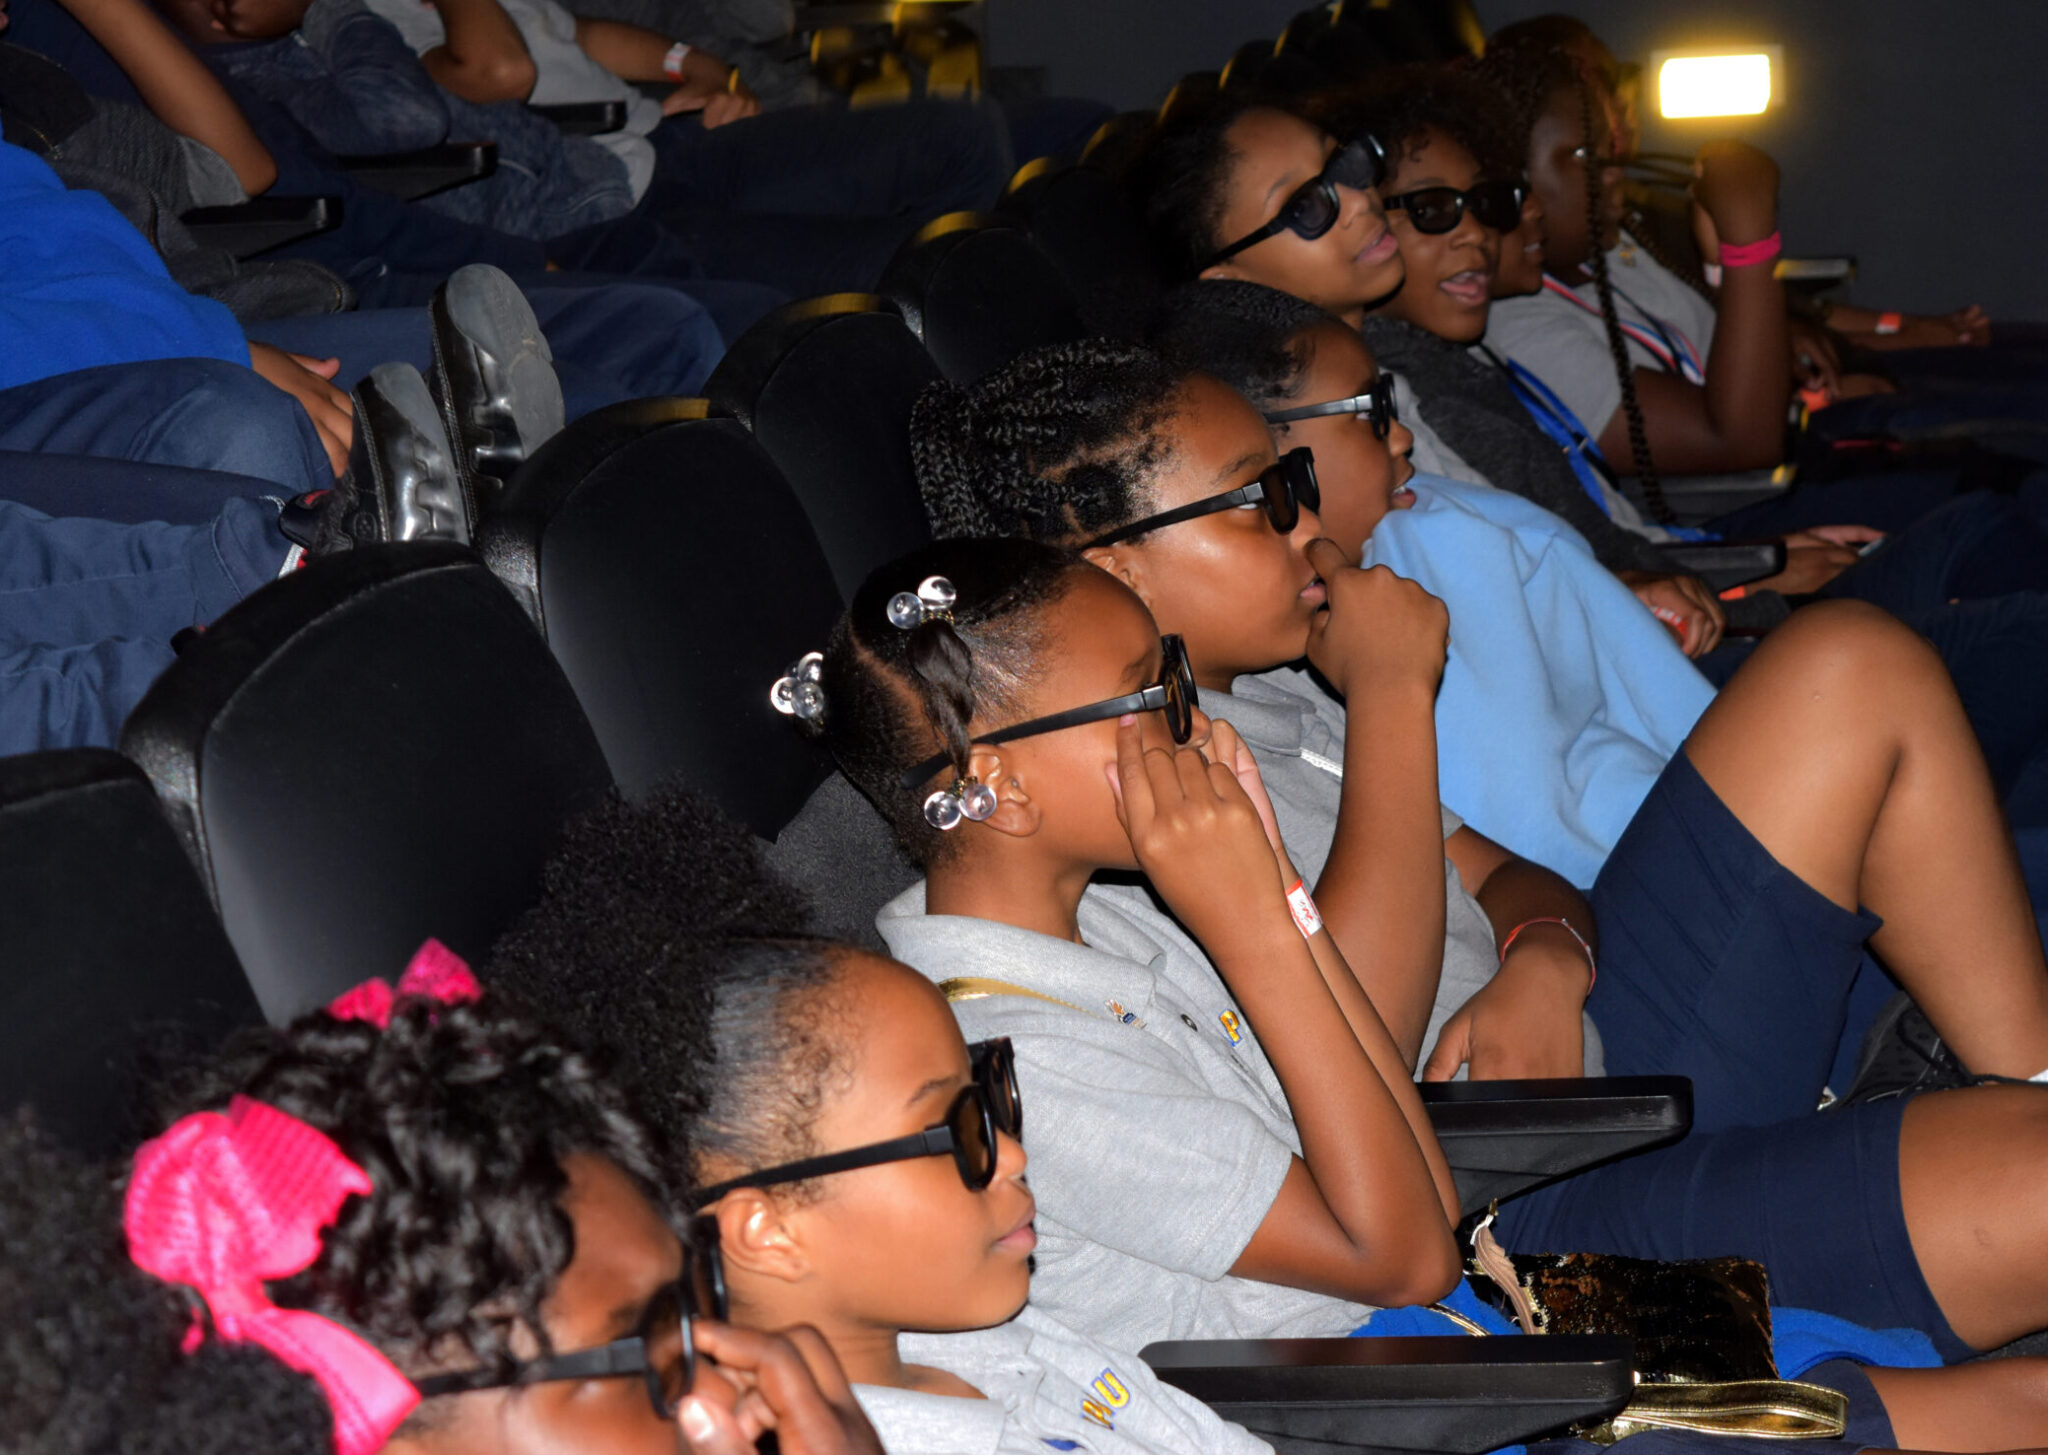 3D Theatre Hall with kids sitting